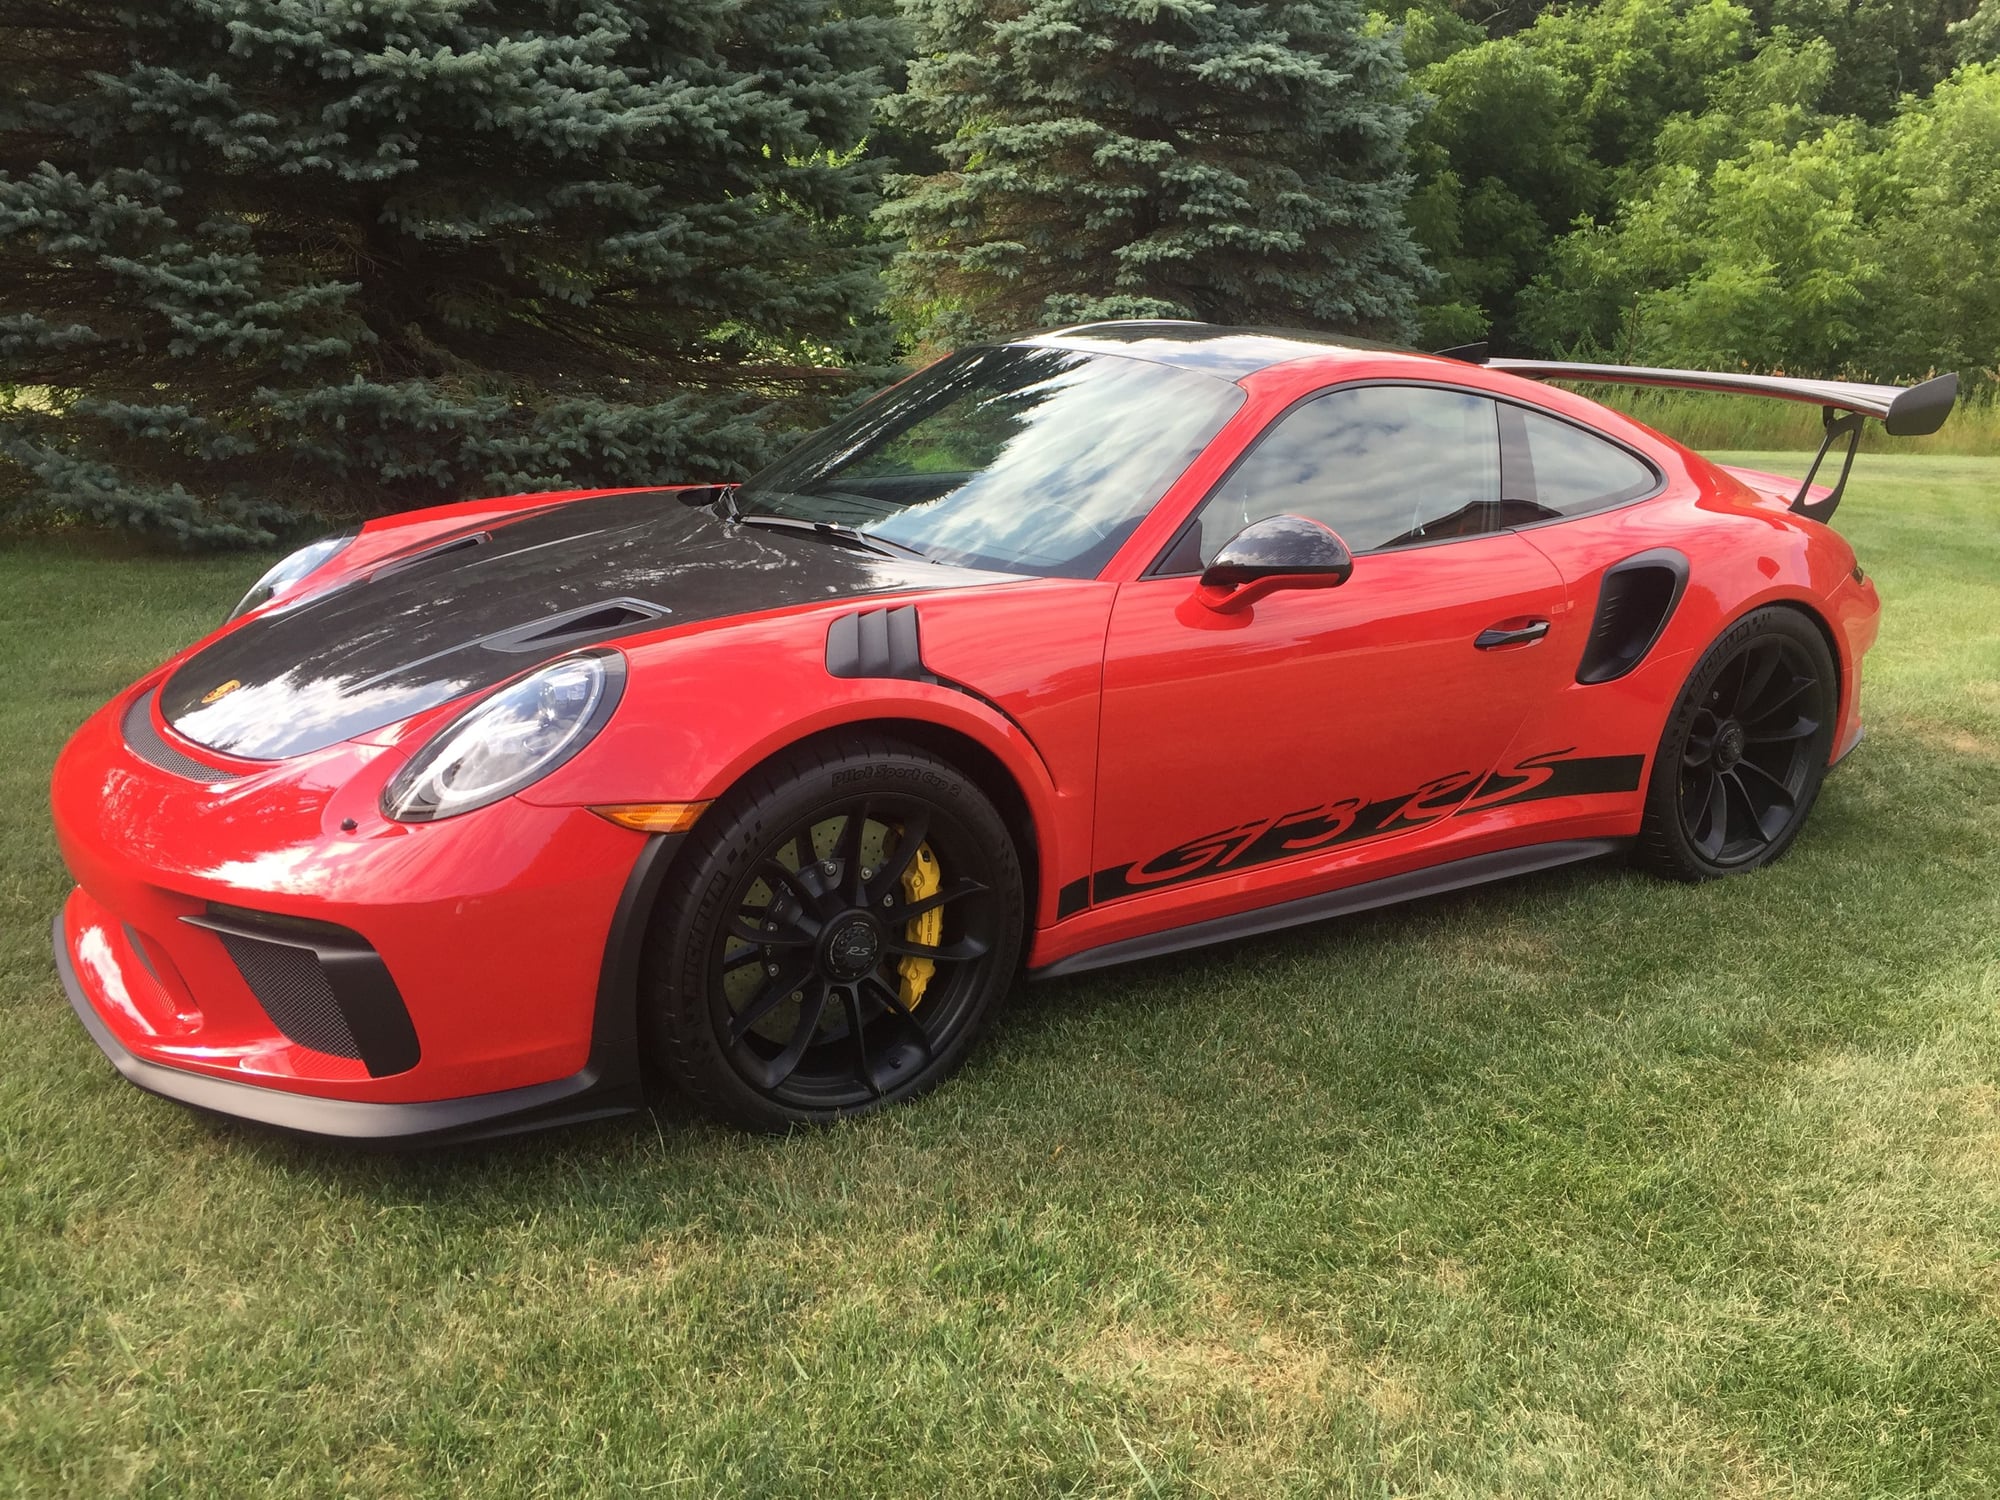 2019 Porsche GT3 - 2019 GT3RS Guard Red with Weissach Package, 225 Miles, Free Xpel Full Body Wrap - Used - VIN WP0AF2A9KS167412 - 225 Miles - 6 cyl - 2WD - Automatic - Coupe - Red - Milwaukee, WI 53201, United States